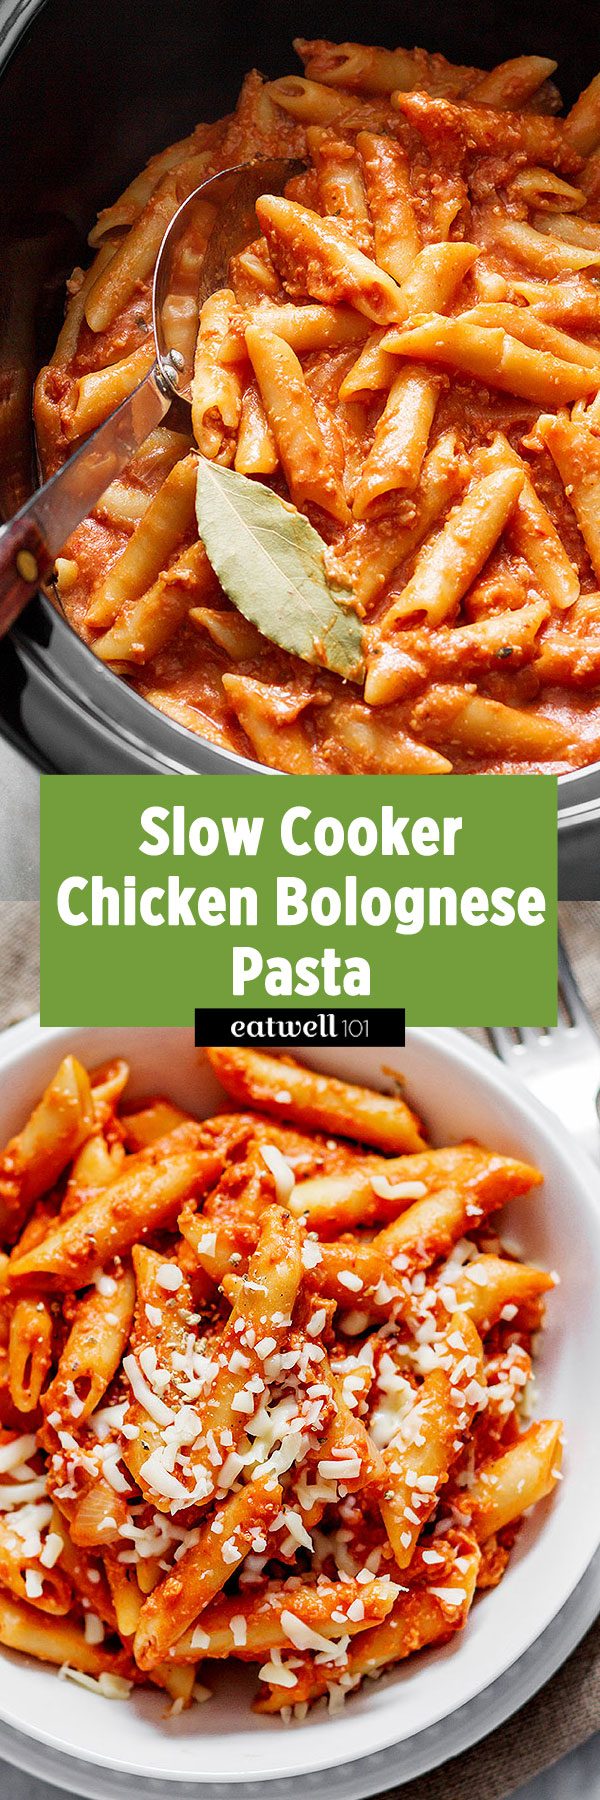 Slow Cooker Chicken Bolognese Pasta - #slowcooker #crockpot #chicken #pasta #recipe #eatwell101 - This Slow Cooker Chicken Bolognese Pasta will have you curling up with a blanket and a good book!